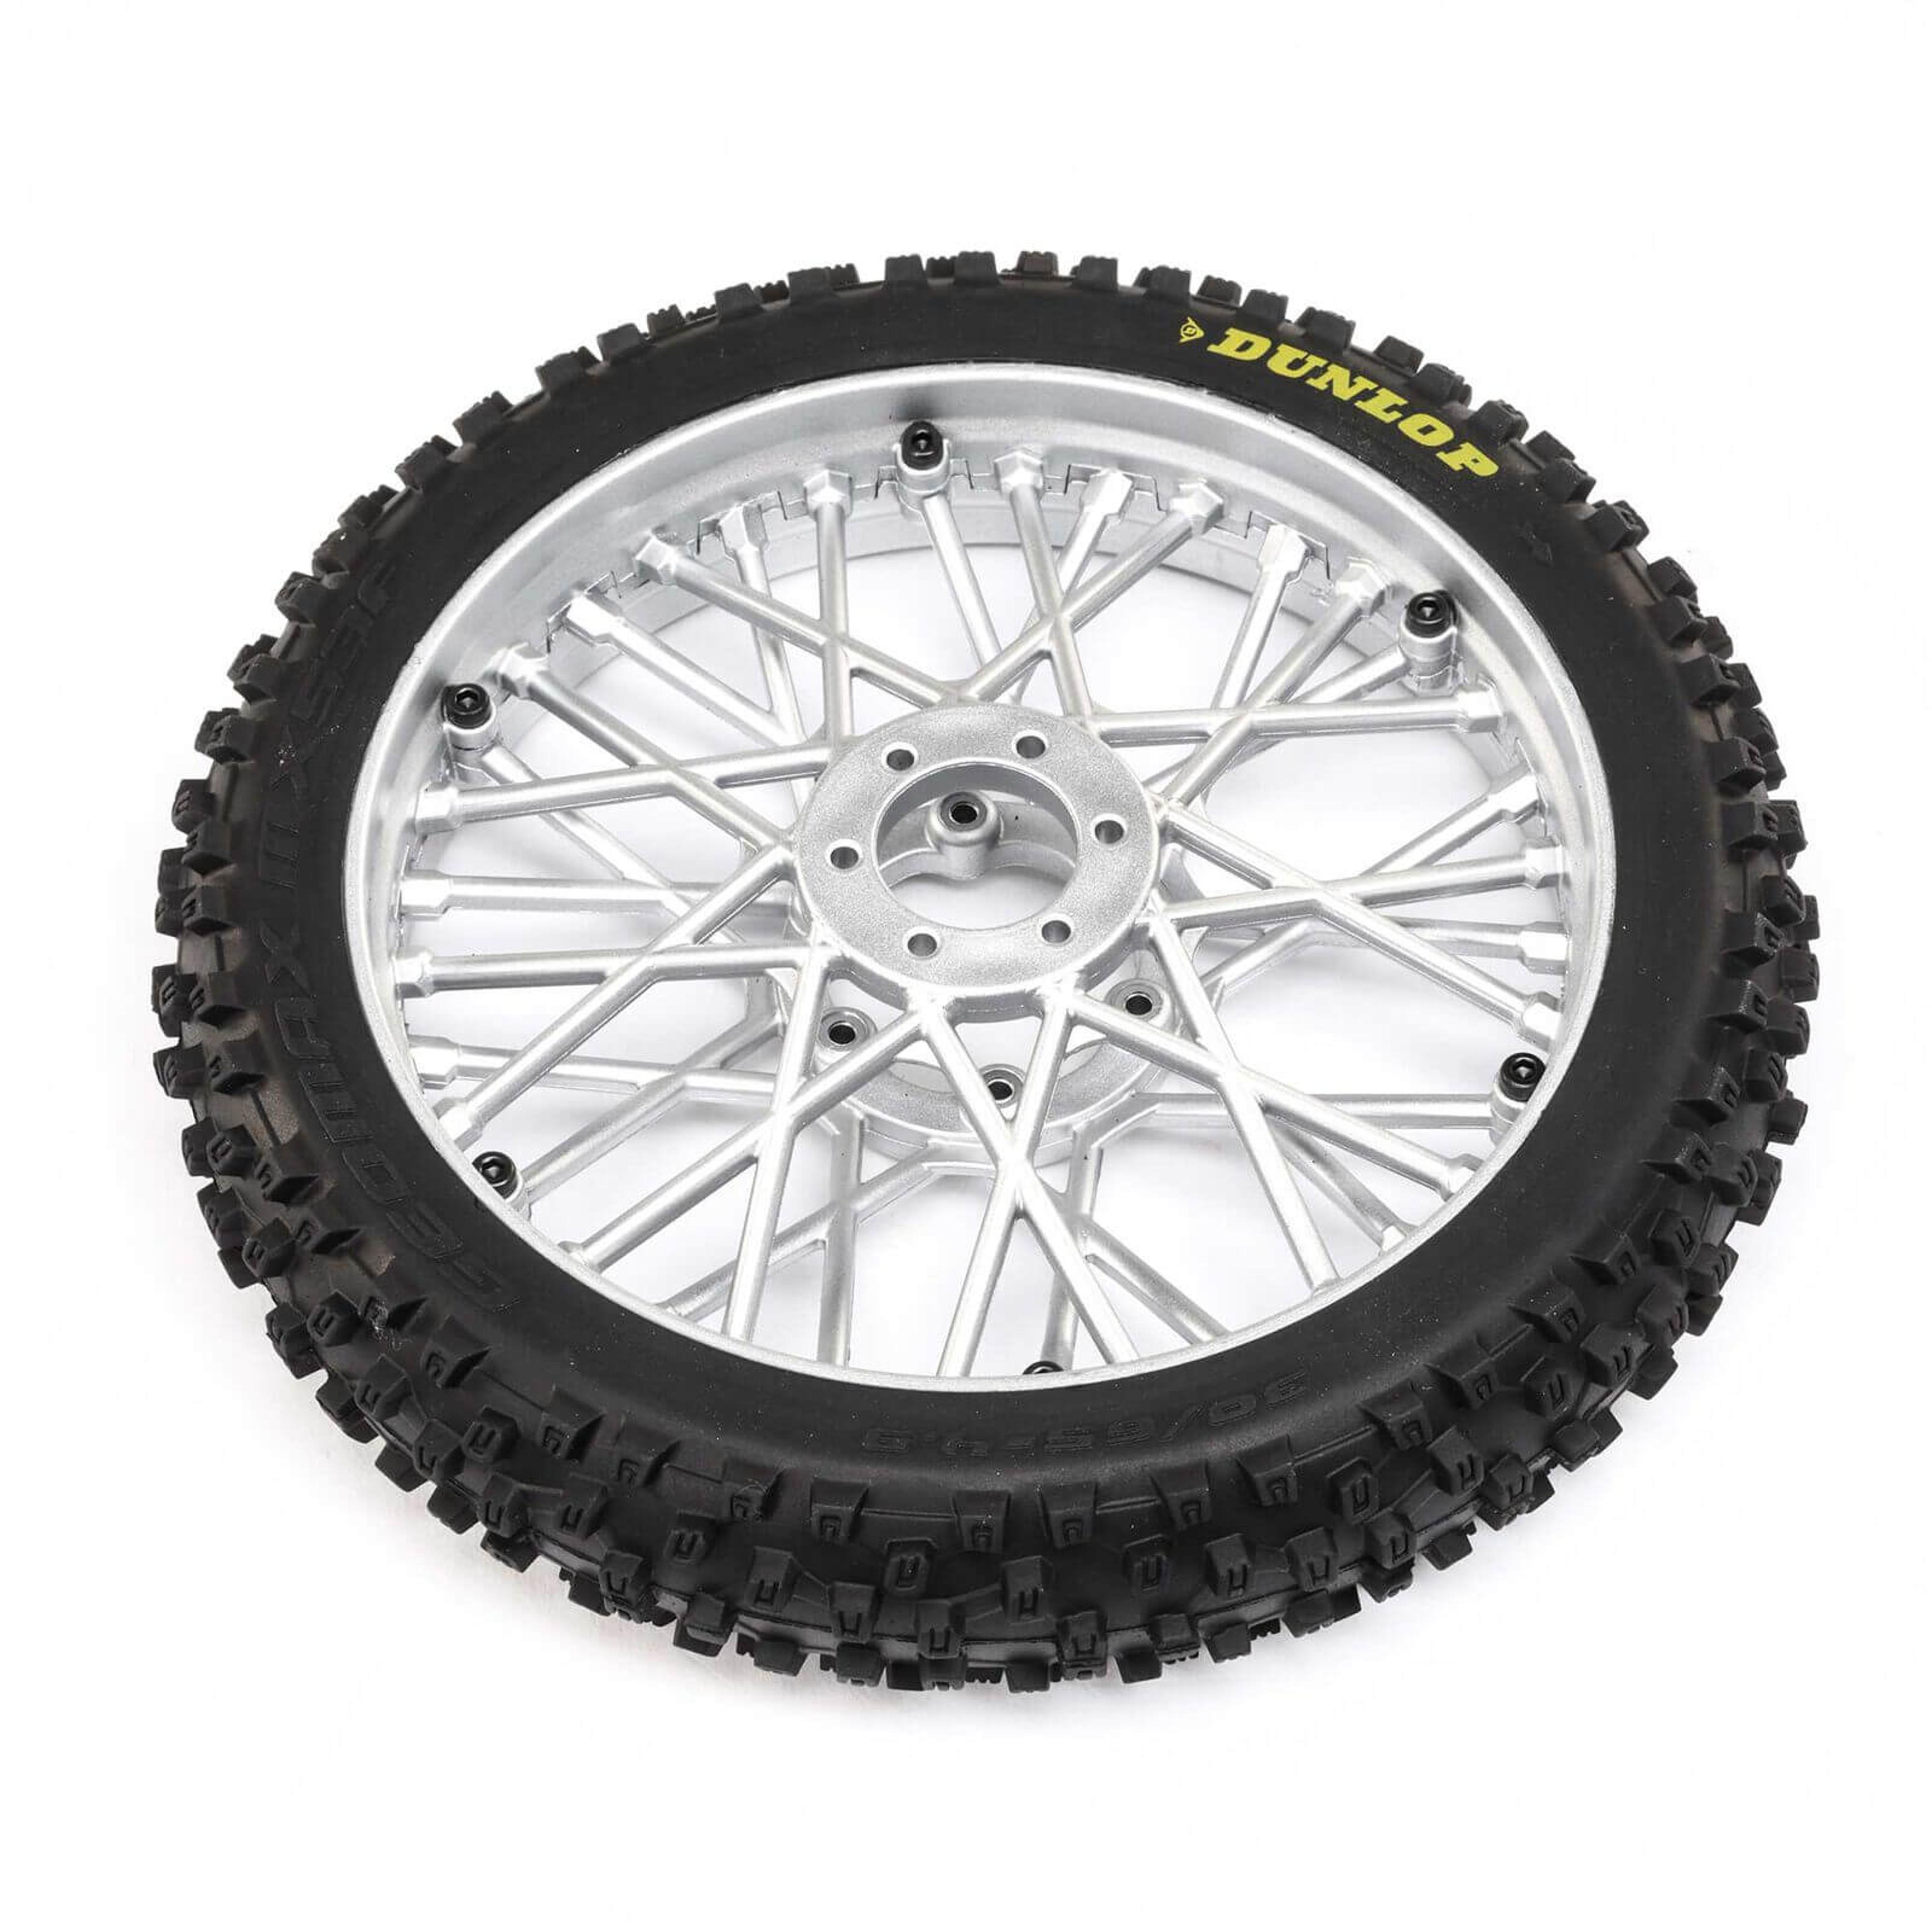 Dunlop MX53 Front Tire Mounted (Chrome)